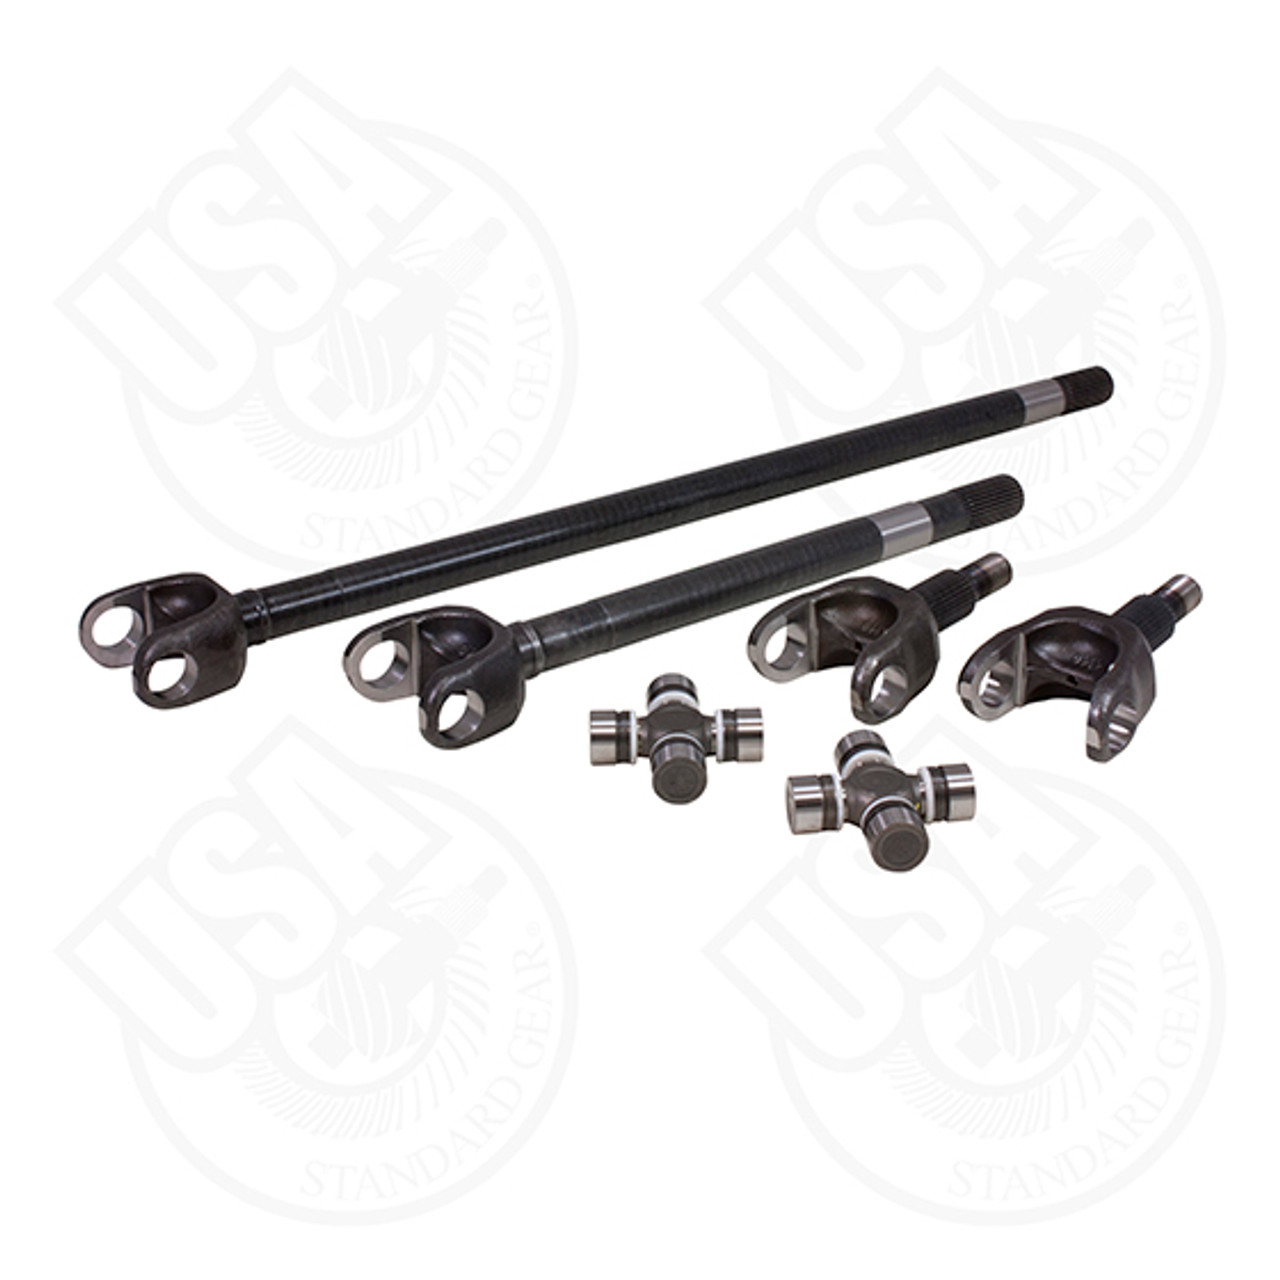 USA Standard 4340 Chrome-Moly replacement axle kit for '74-'79 Jeep Wagoneer, Dana 44 w/Disc Brakes